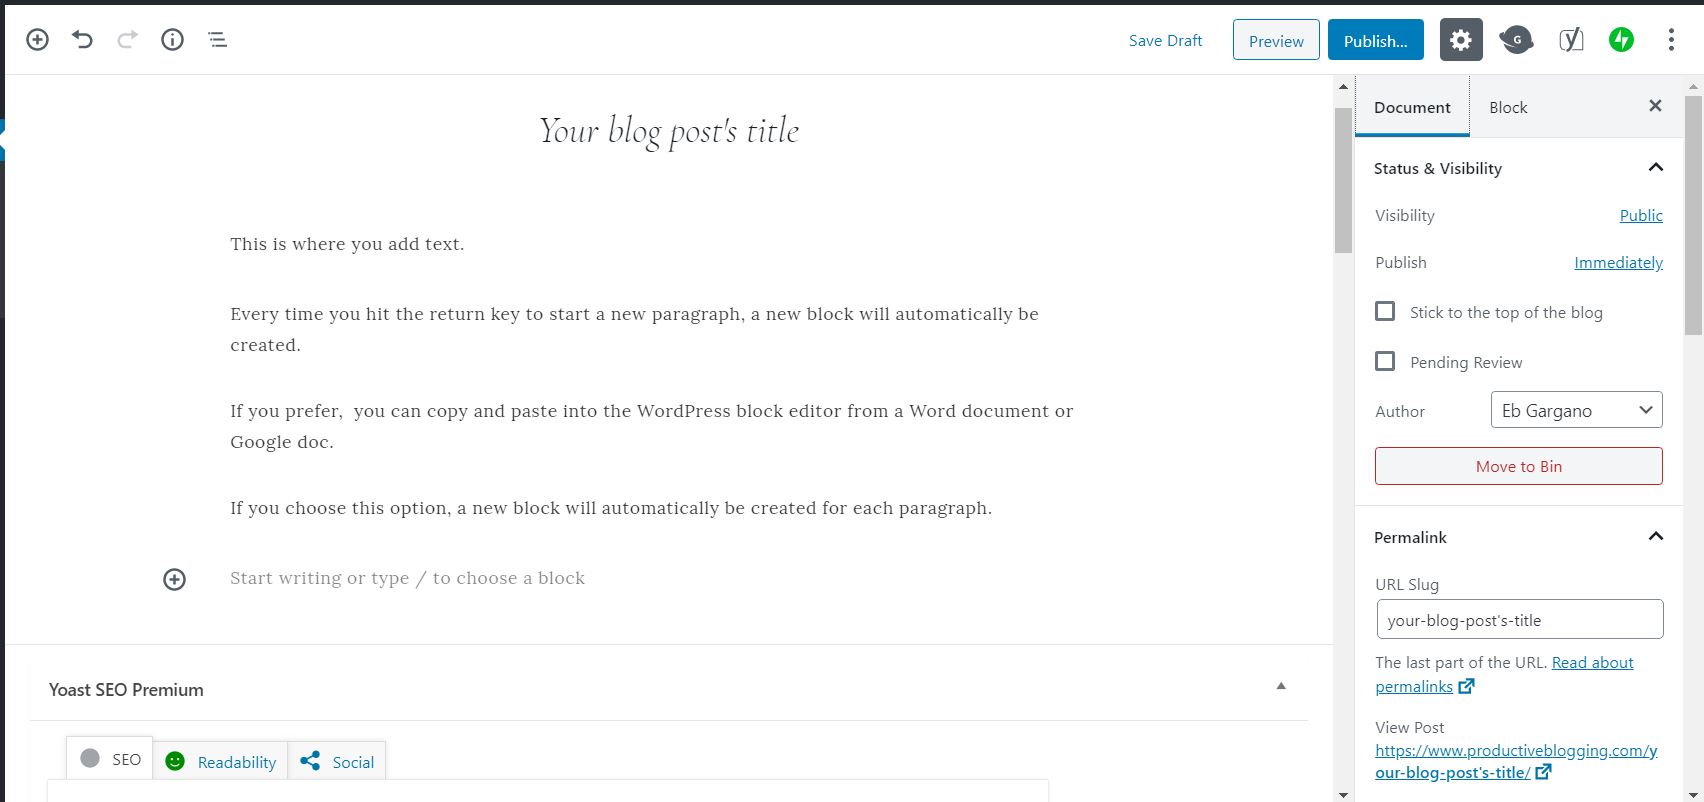 How to add paragraph text in a blog post using the WordPress block editor